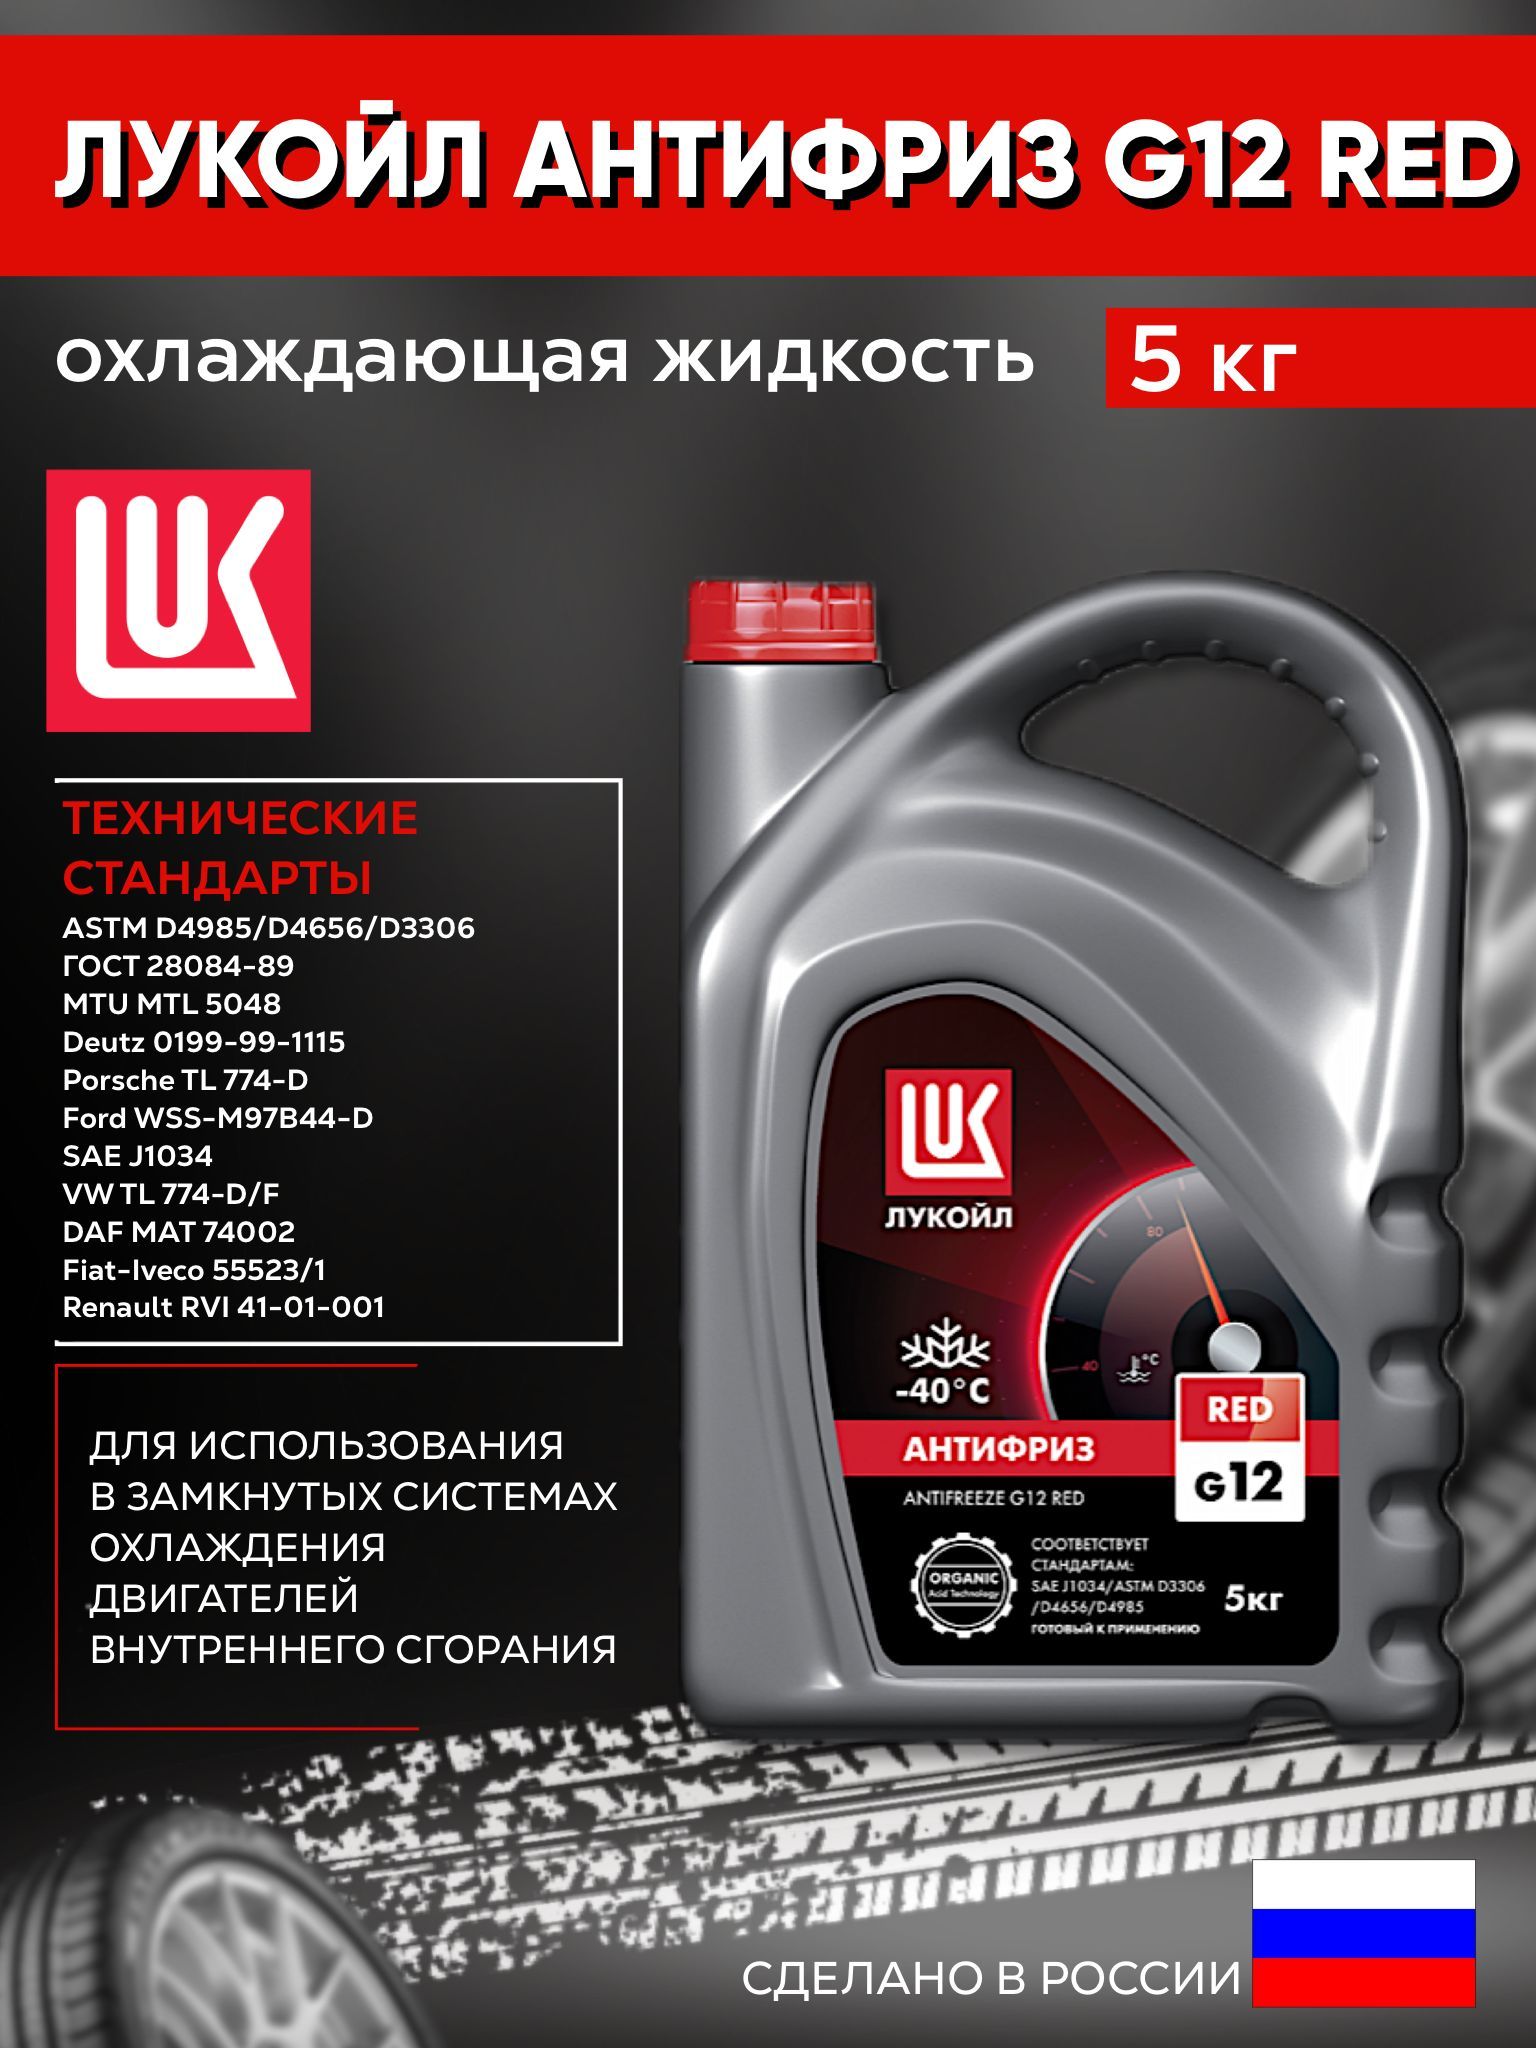 Лукойл g12 Red бочка. Антифриз Lukoil. Антифриз Лукойл красный. Антифриз от Лукойла. Антифриз лукойл отзывы